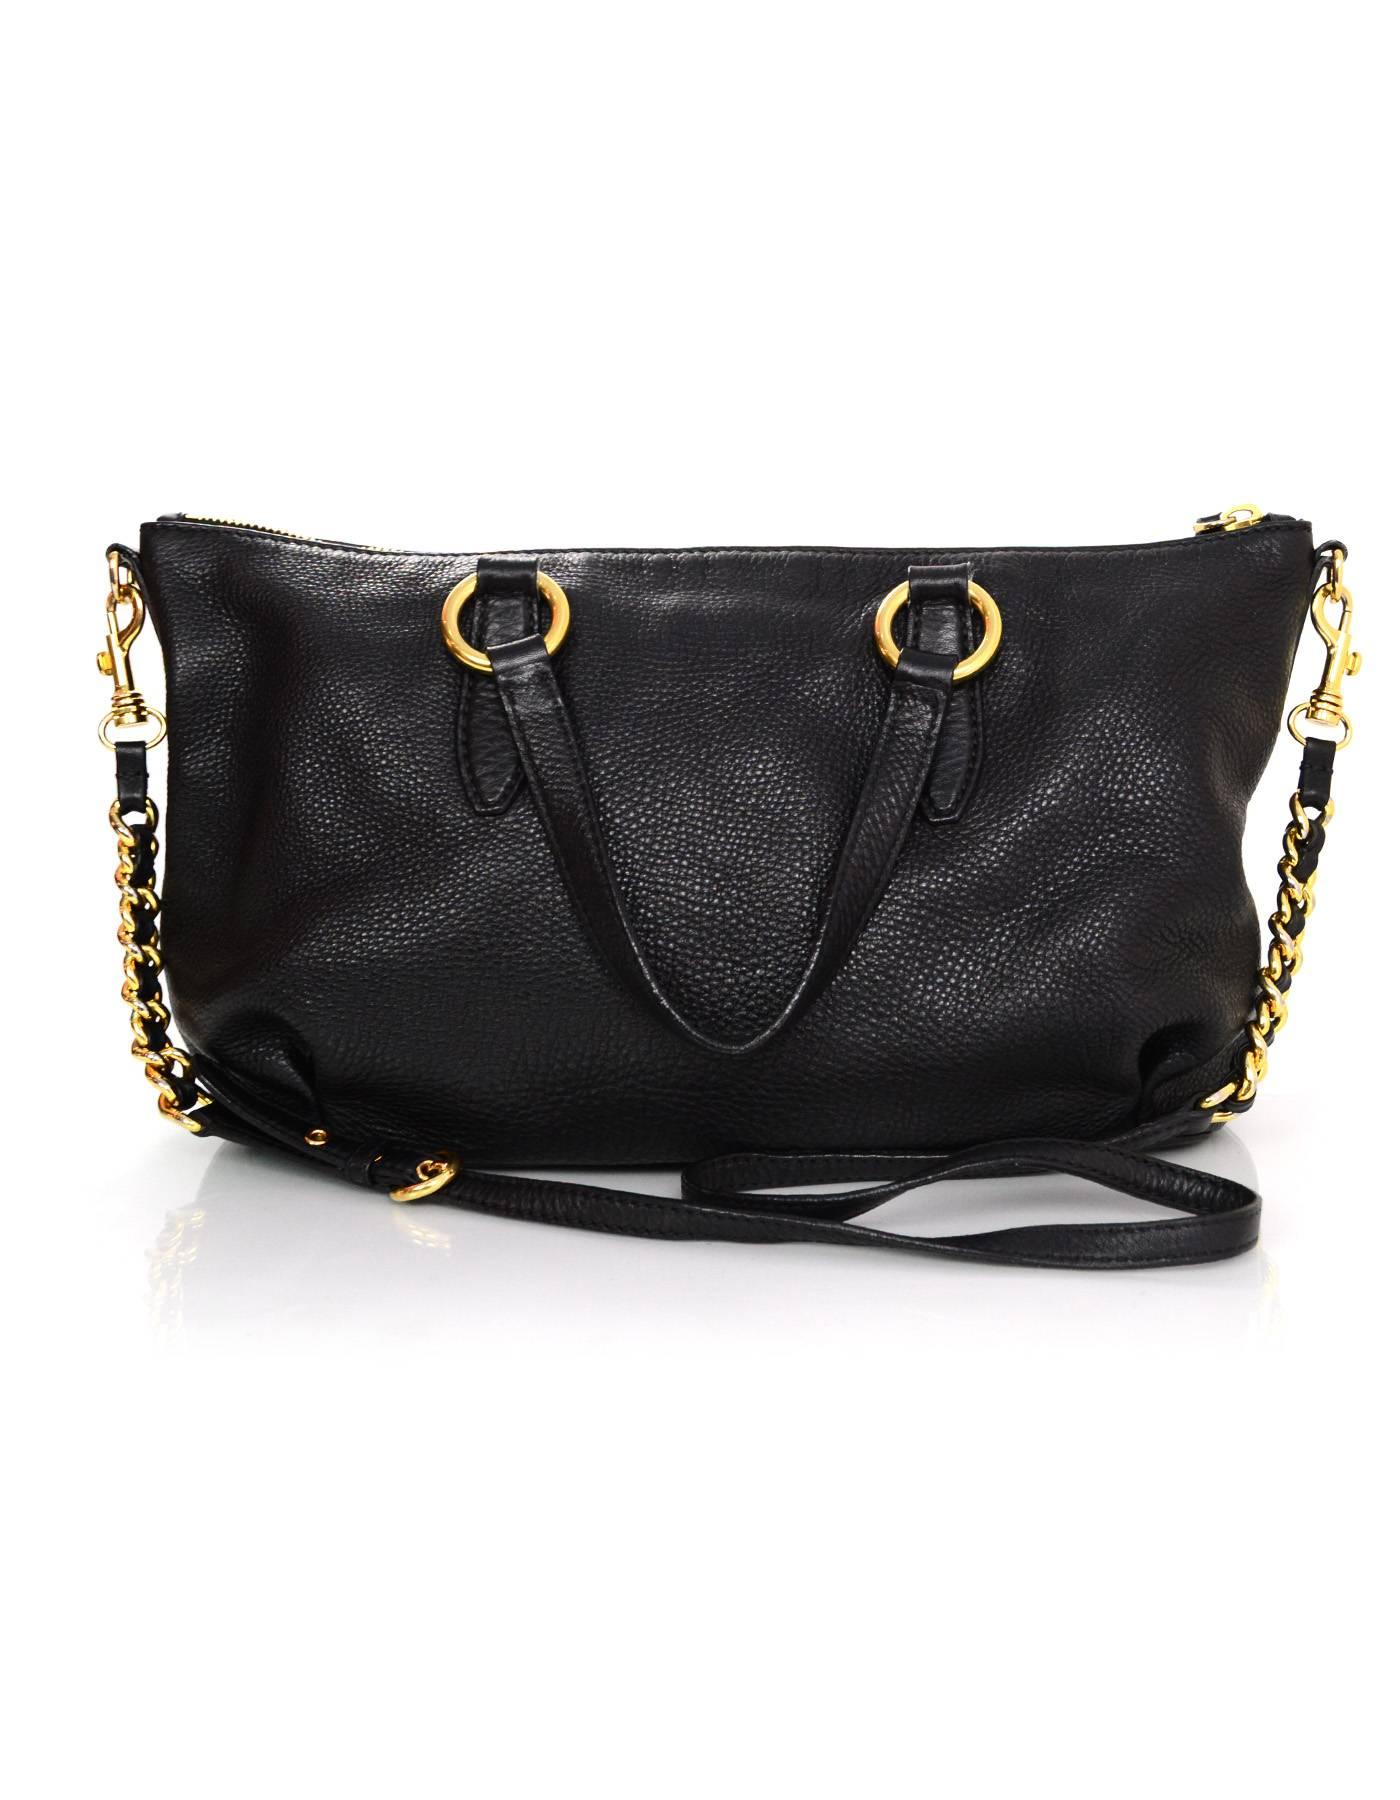 Miu Miu Black Leather Tote
Featuers optional shoulder/crossbody strap

Made In: Turkey
Color: Black
Hardware: Goldtone
Materials: Leather
Lining: Black nylon blend fabric
Closure/Opening: Zip across top
Exterior Pockets: None
Interior Pockets: One